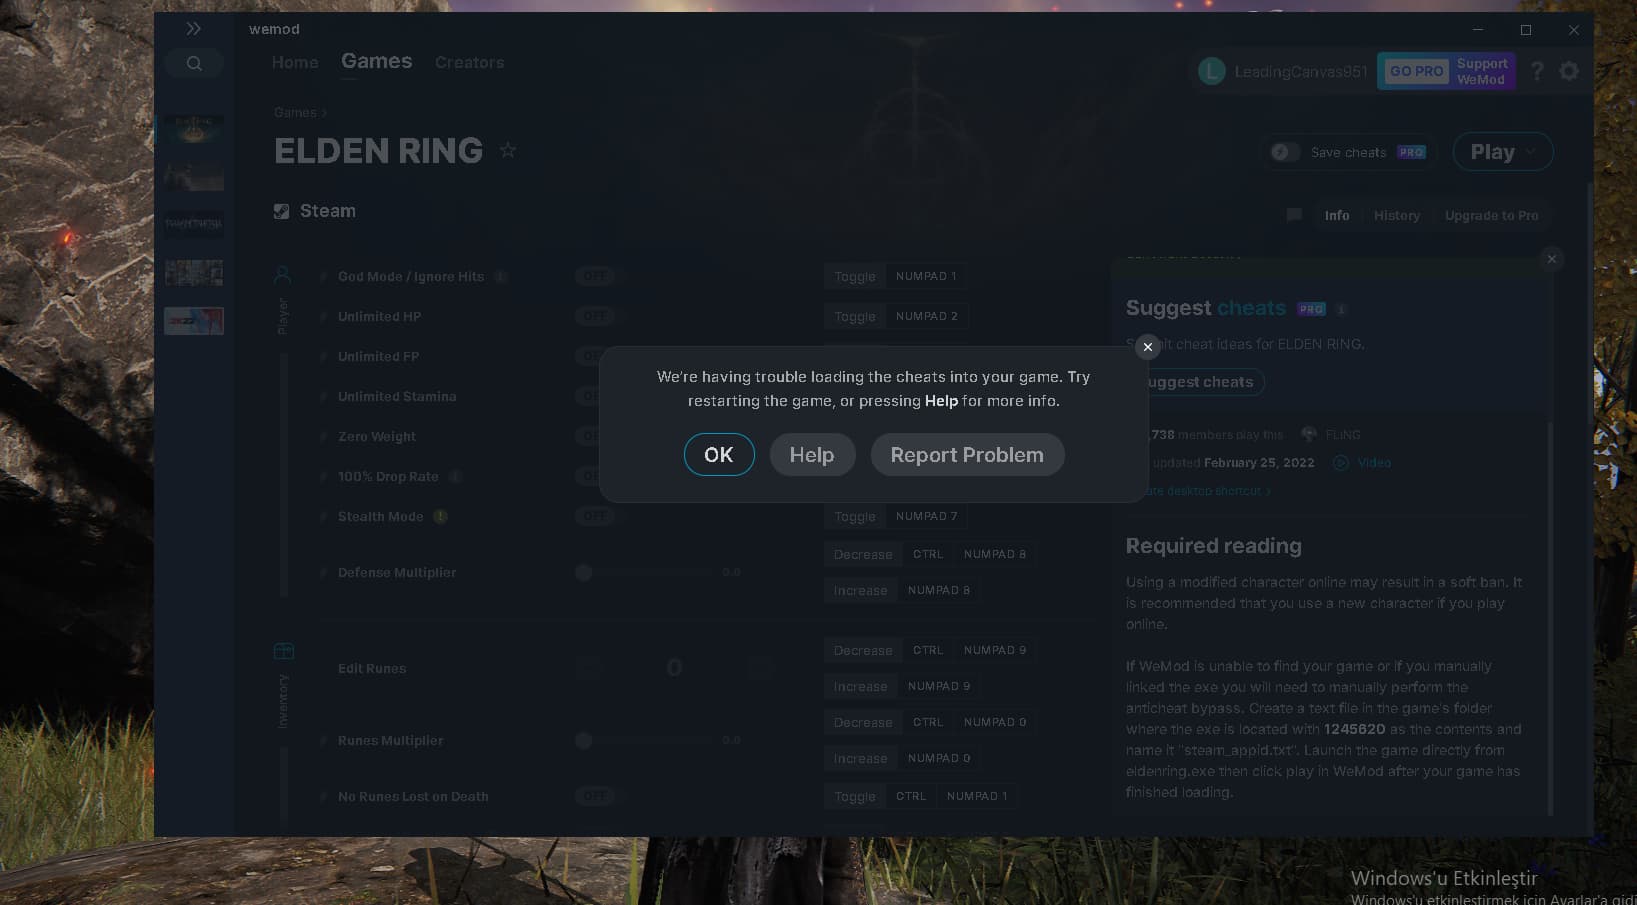 Ring Login Issues Wednesday Stem From System Error, Not Hack